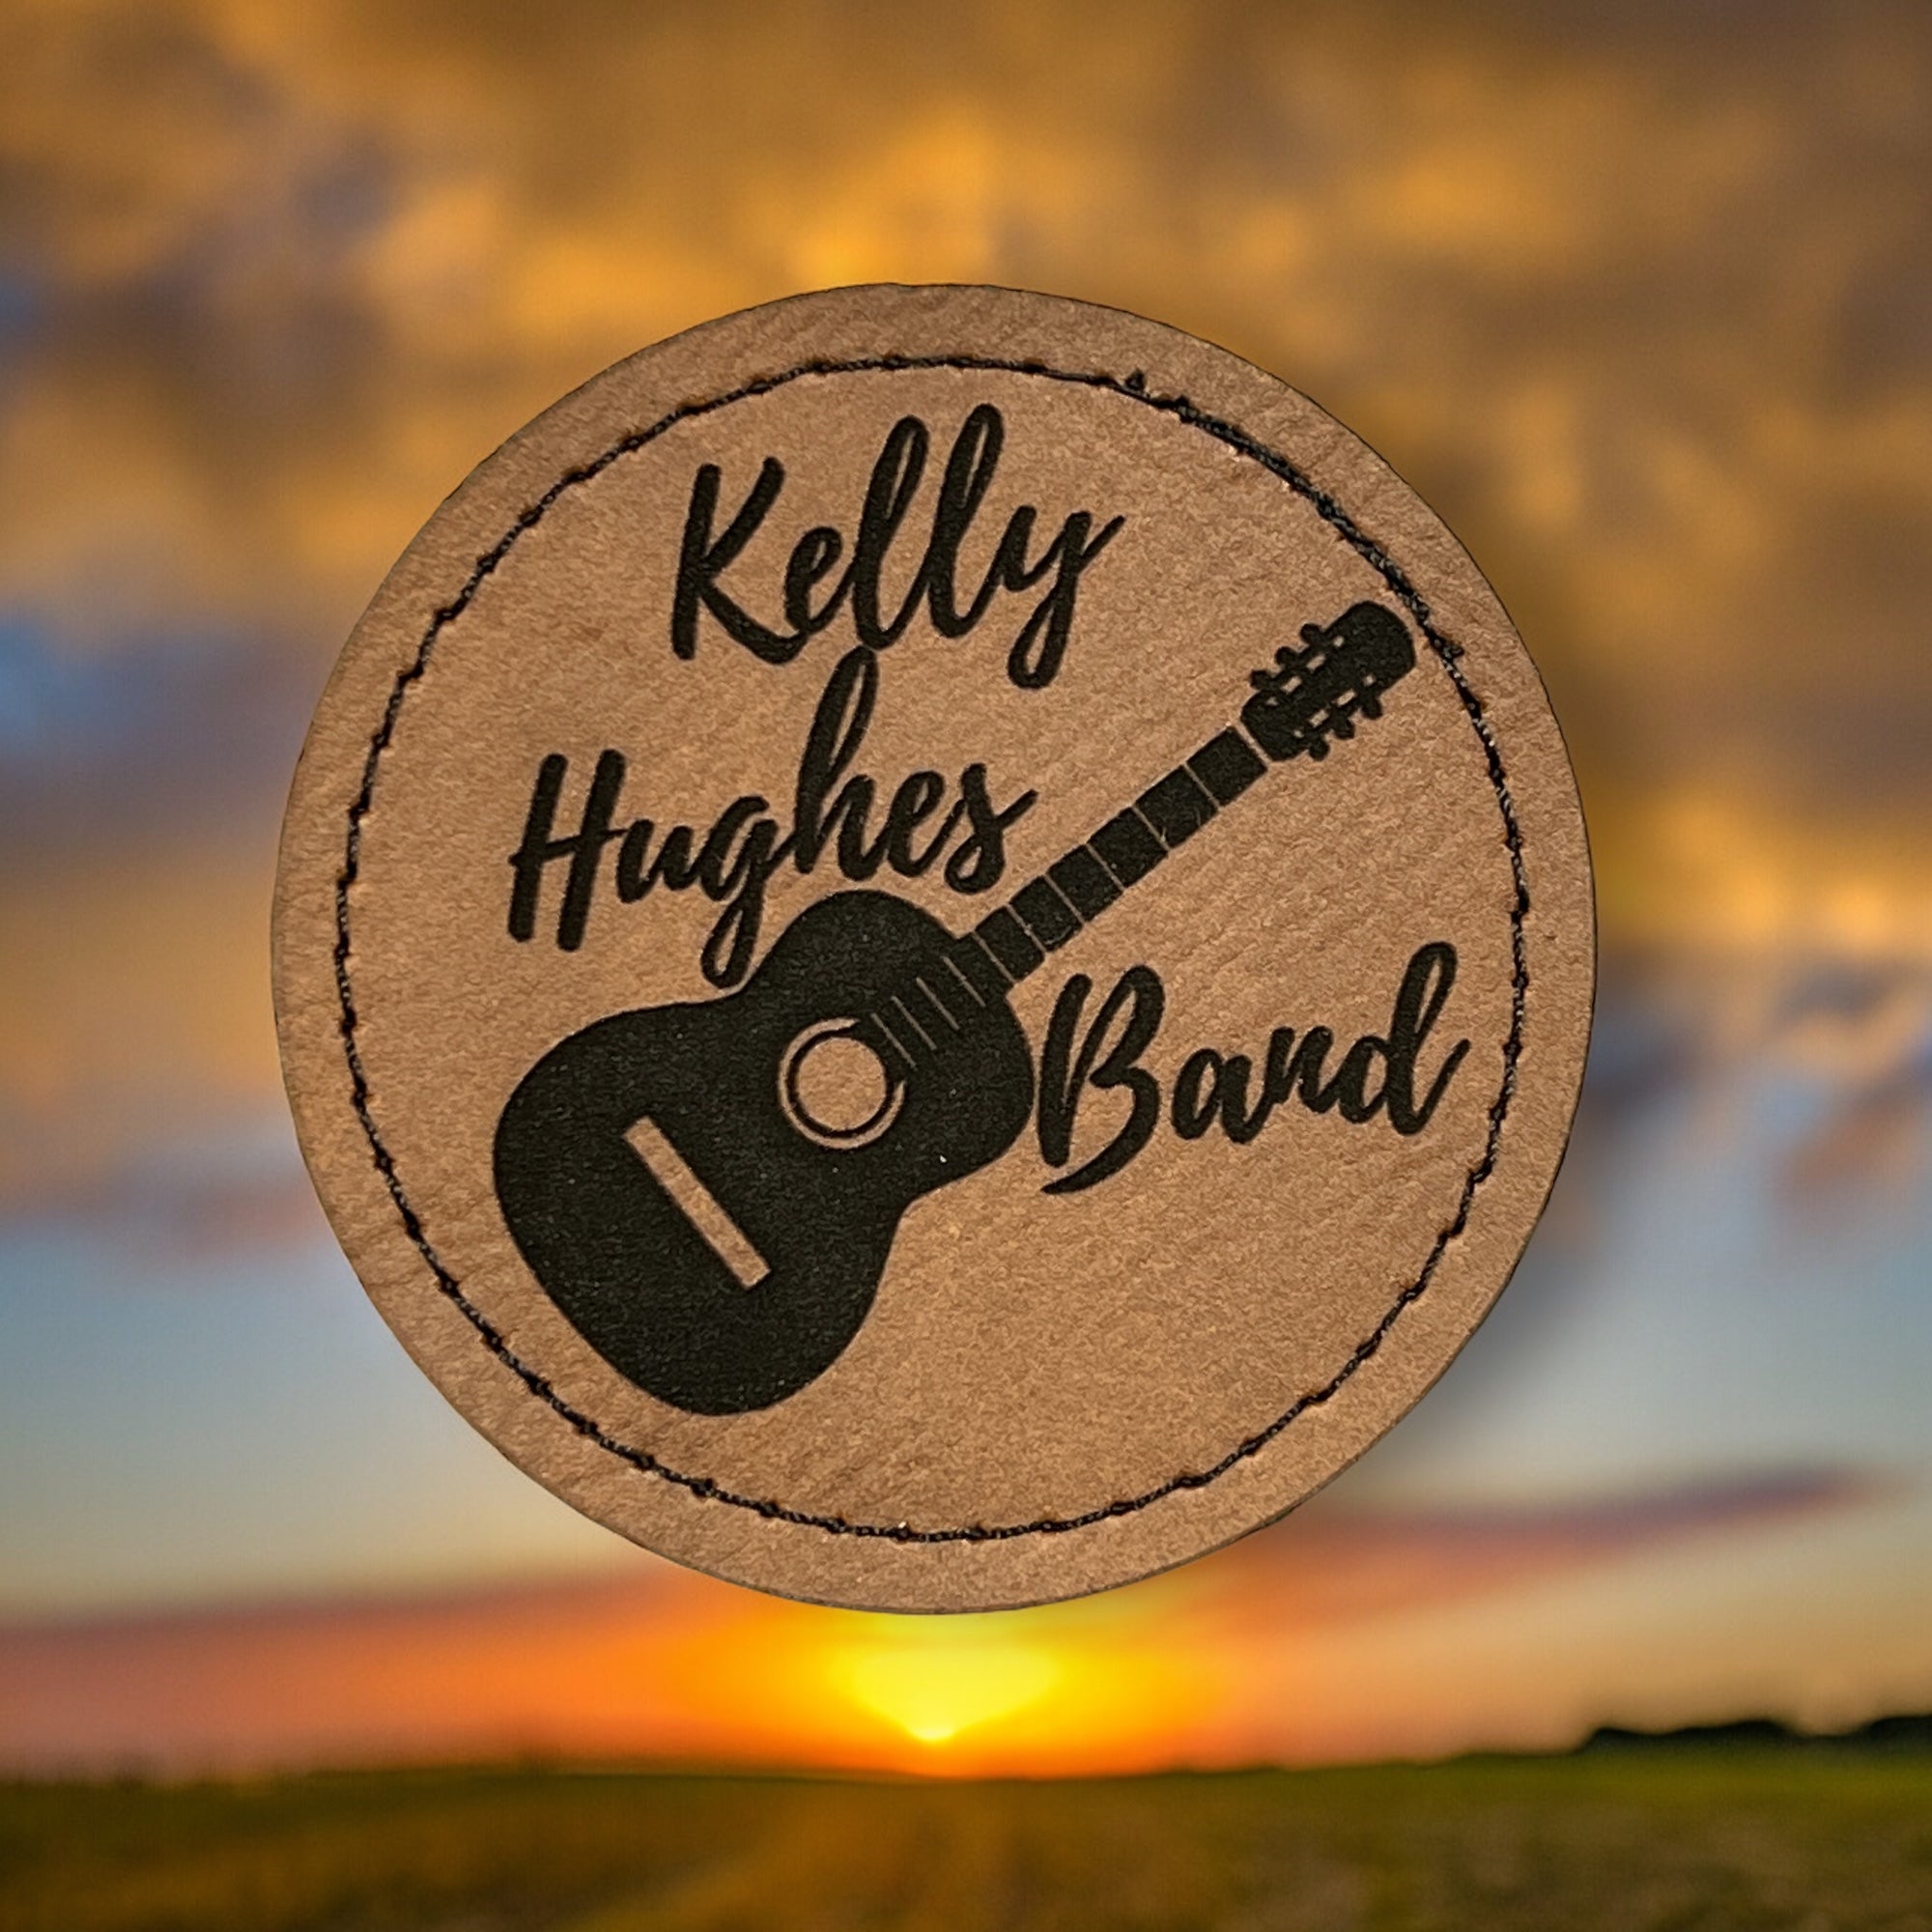  Image of the Kelly Hughes Band Round Patch, featuring the band's logo in vibrant colors, ideal for adding a pop of personality to clothing or accessories.